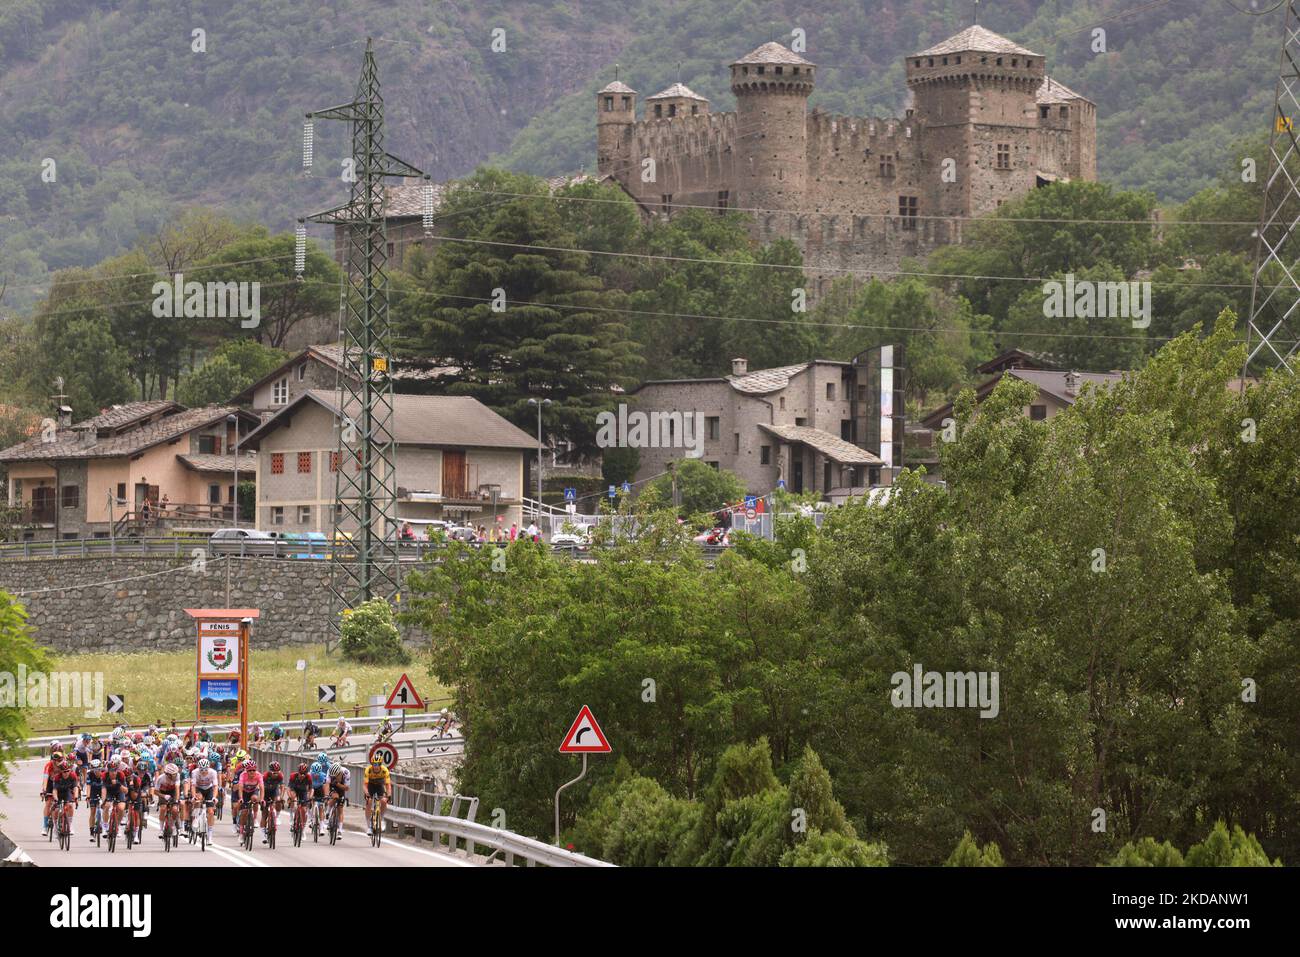 The group at the passage near the Fenis Castle during the Giro d'Italia Stage 15 - Rivarolo Canavese - Cogne on May 22, 2022 at the Cogne in Cogne, Italy (Photo by Claudio Benedetto/LiveMedia/NurPhoto) Stock Photo